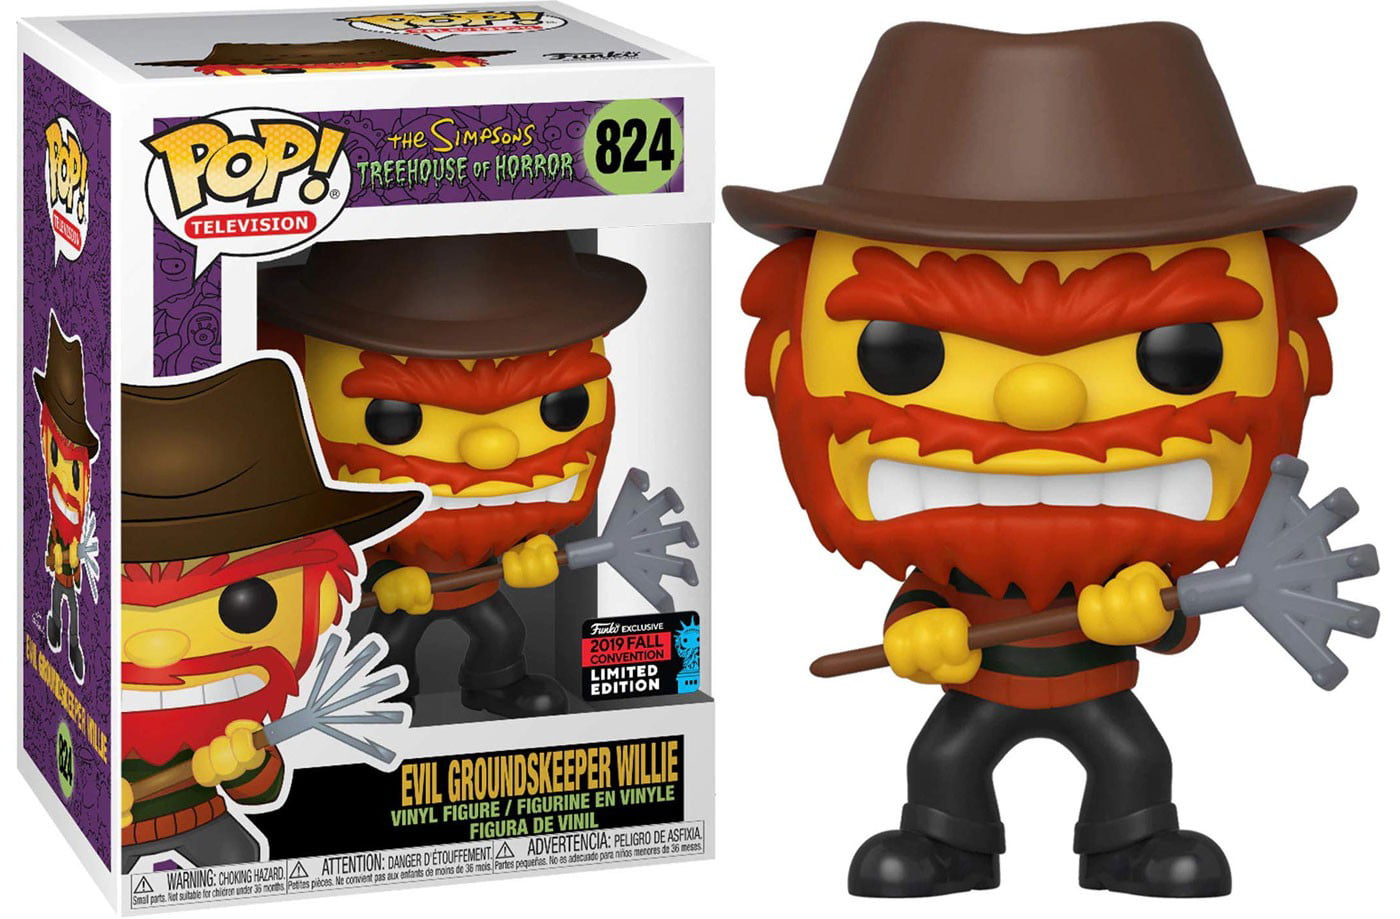 The Raven Bart - The Simpsons Treehouse of Horror - 1032 - Pop 